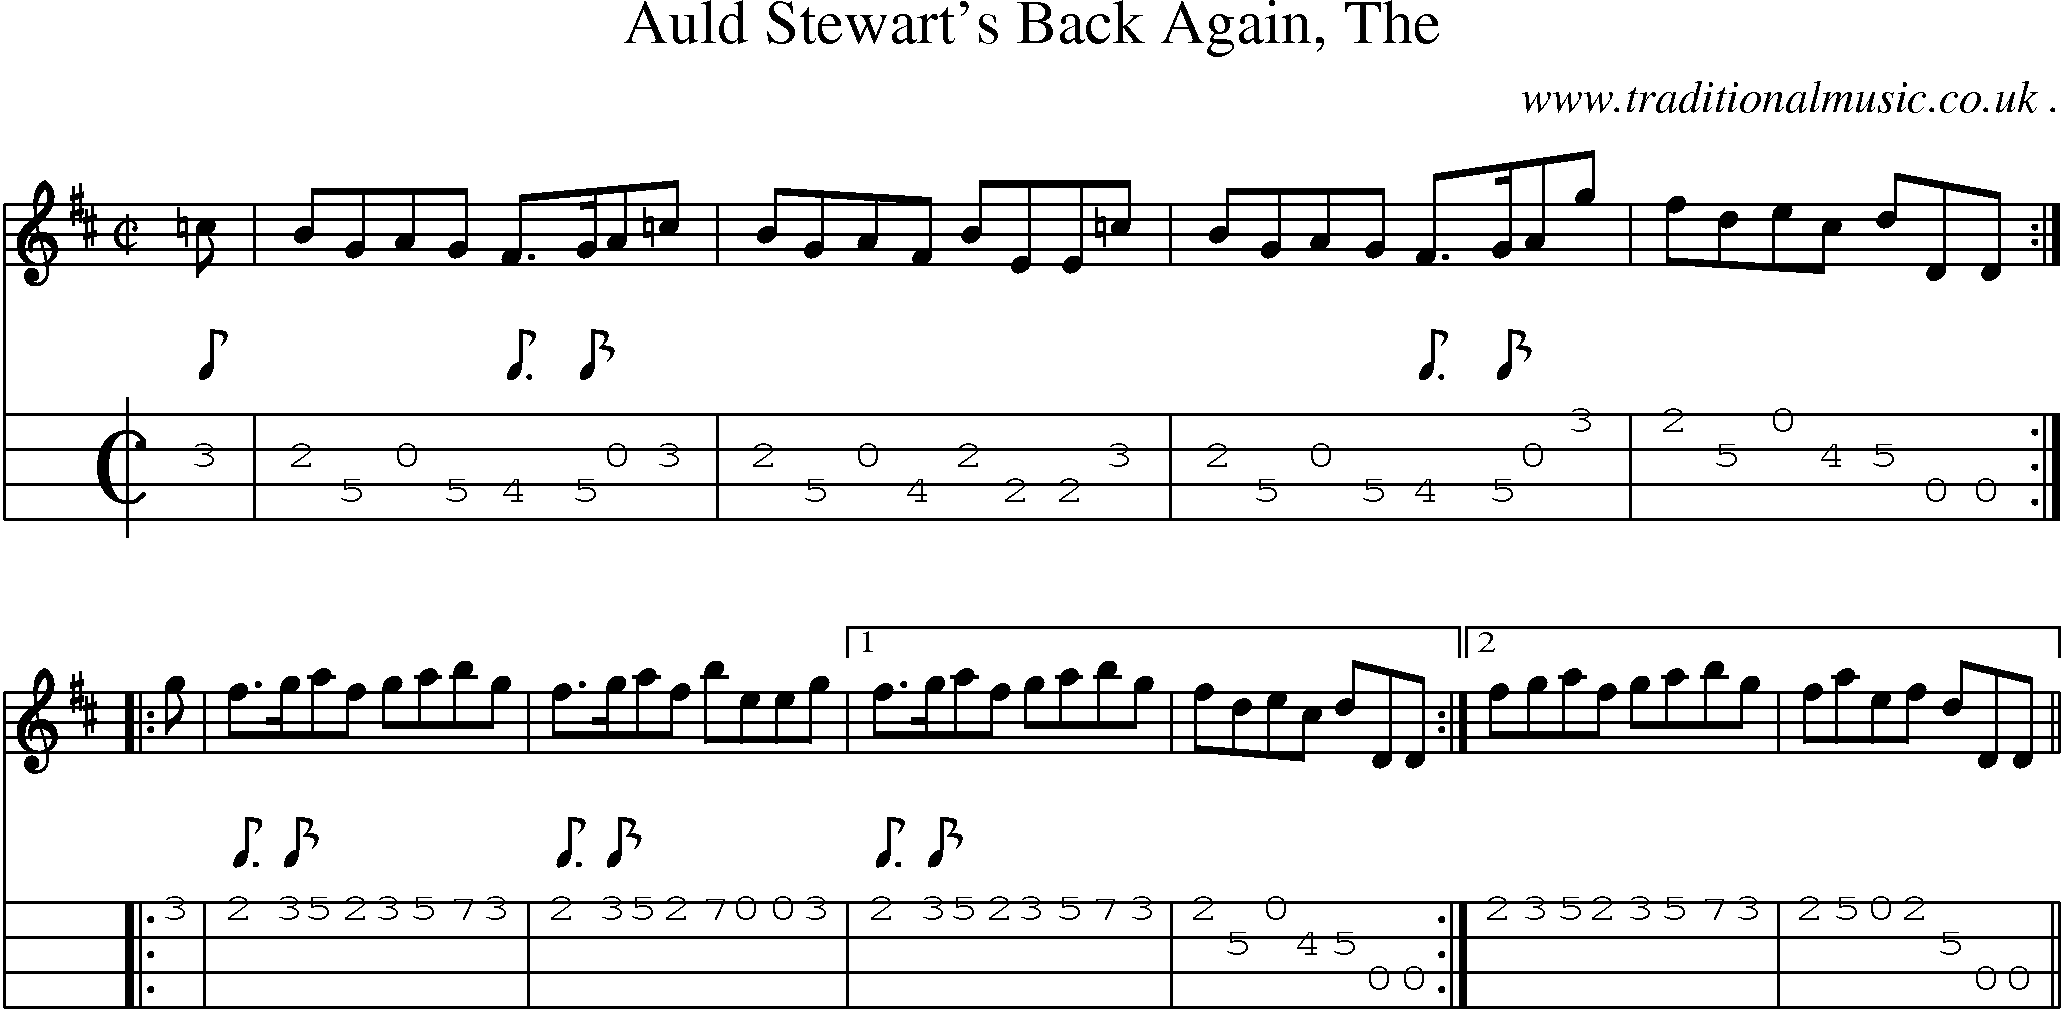 Sheet-music  score, Chords and Mandolin Tabs for Auld Stewarts Back Again The